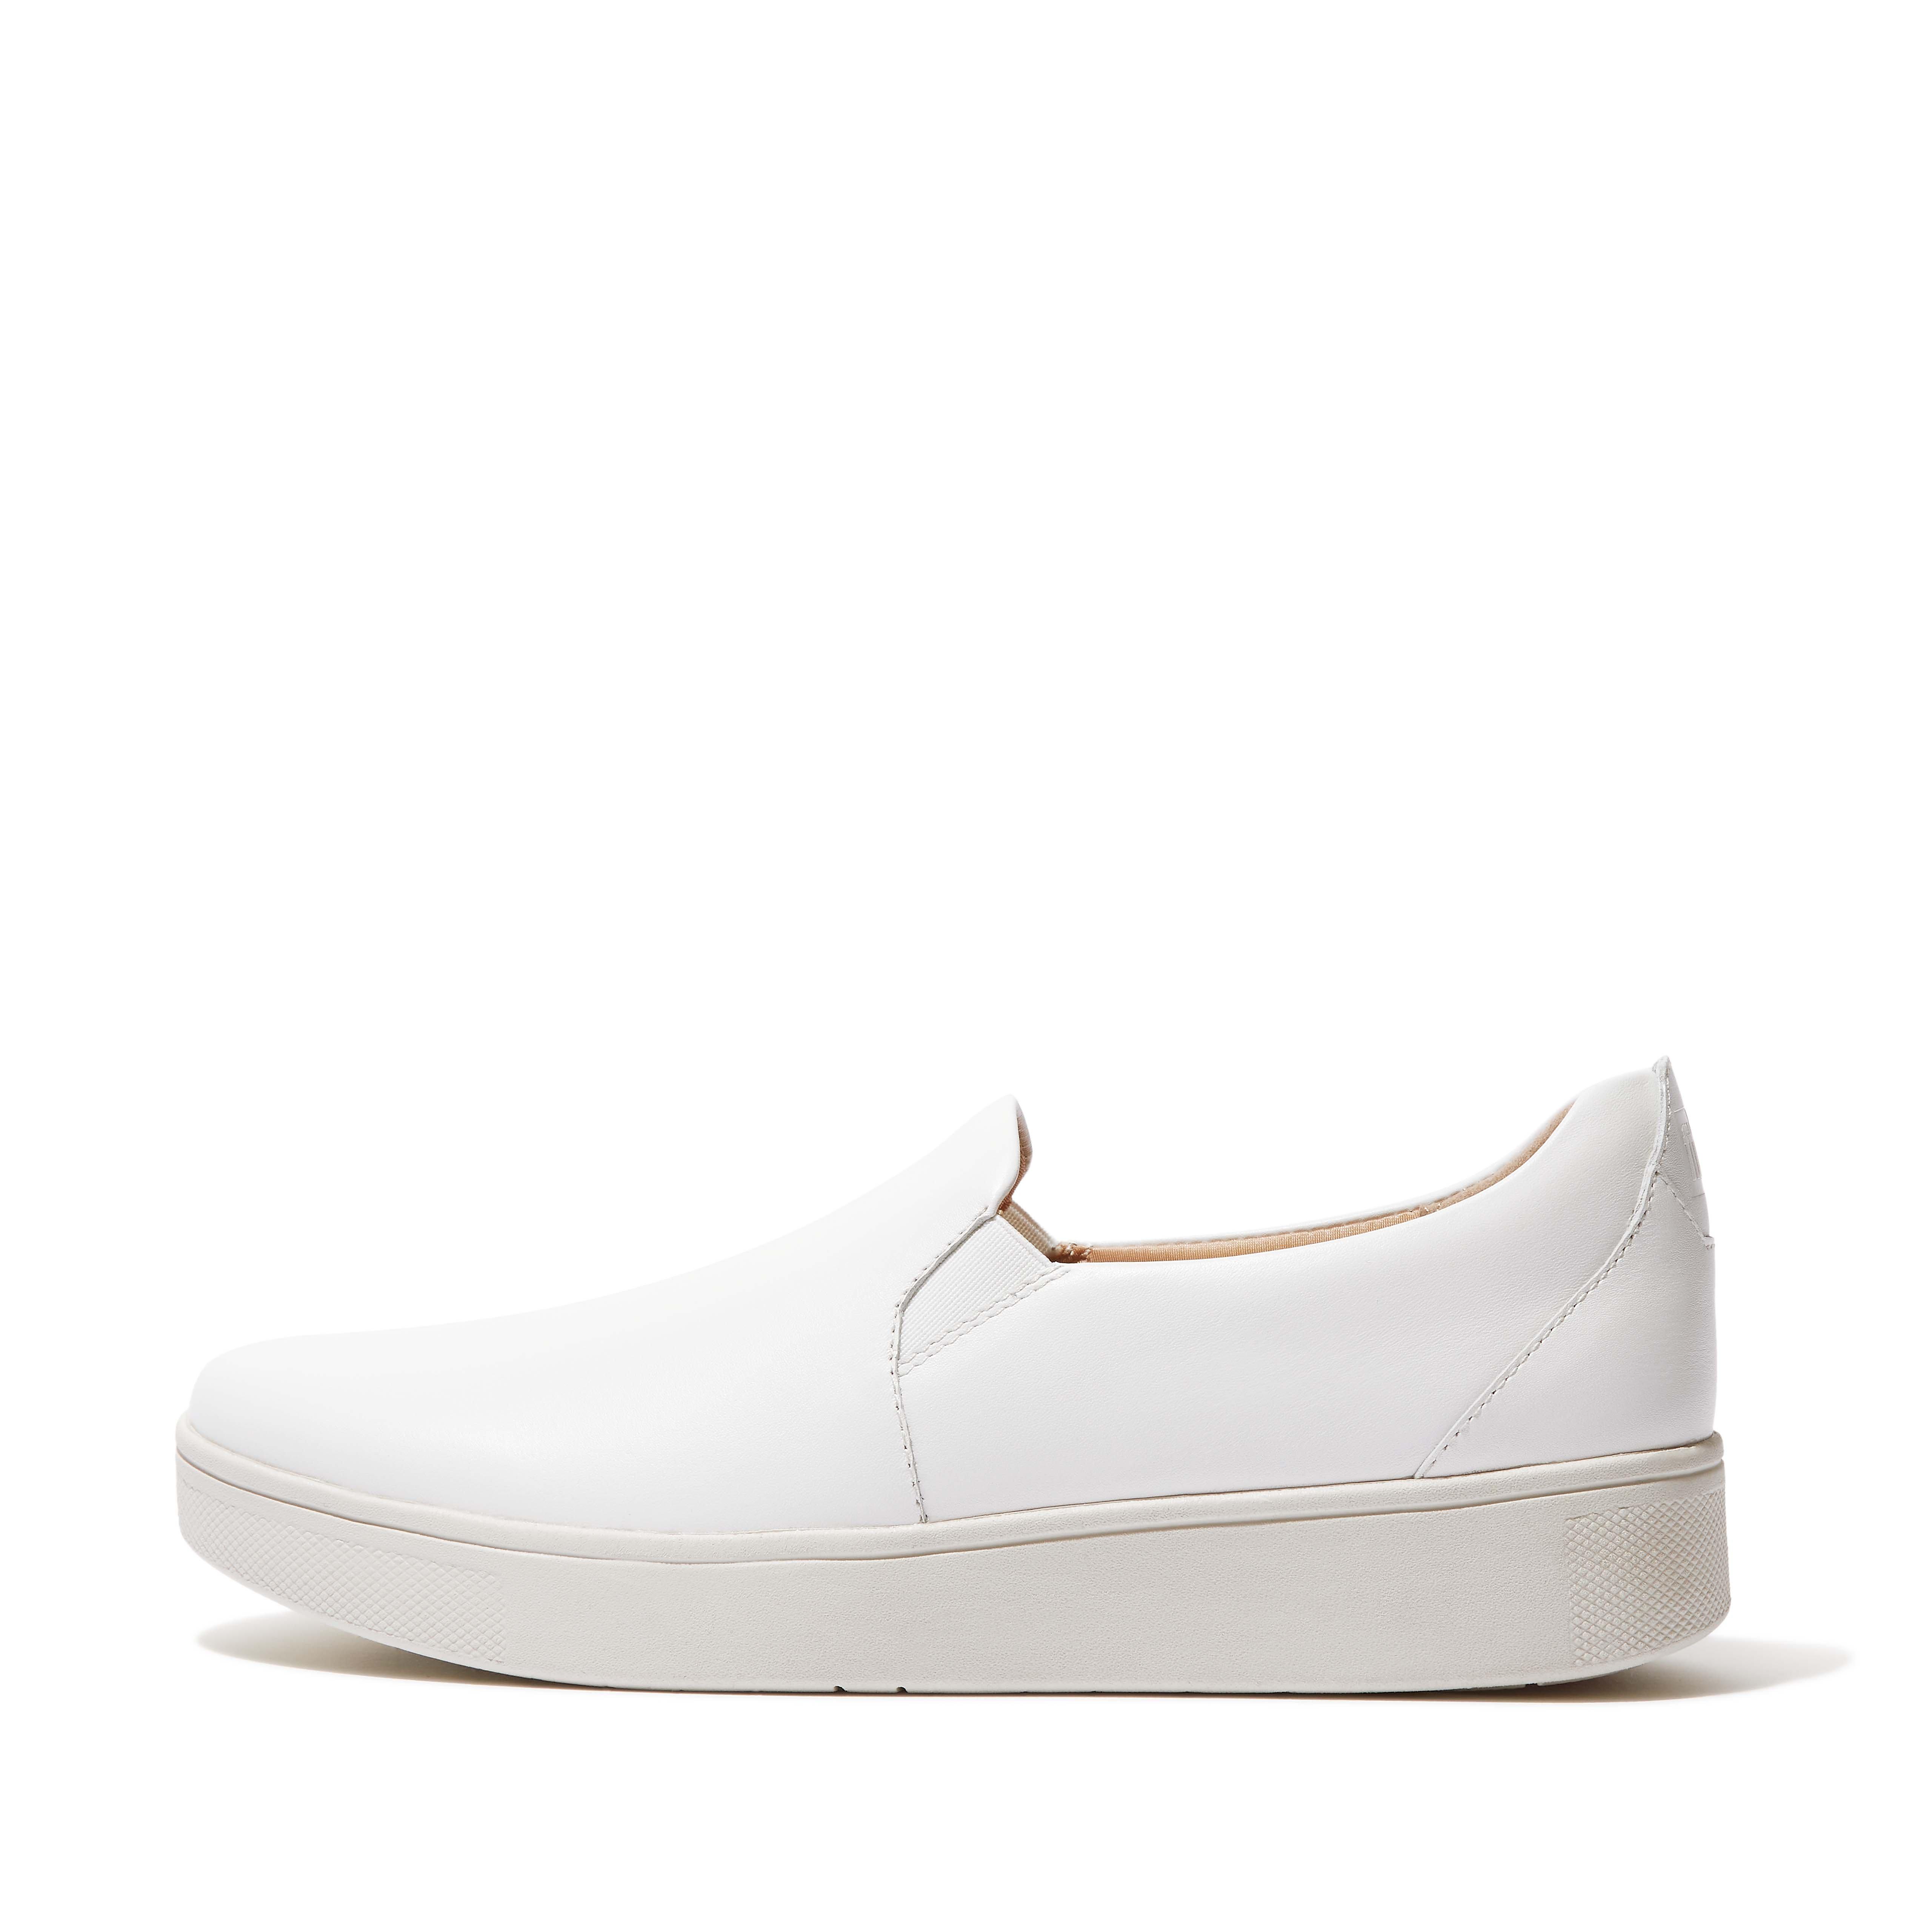 Women's Rally Leather Slip On Skate Sneakers | FitFlop EU